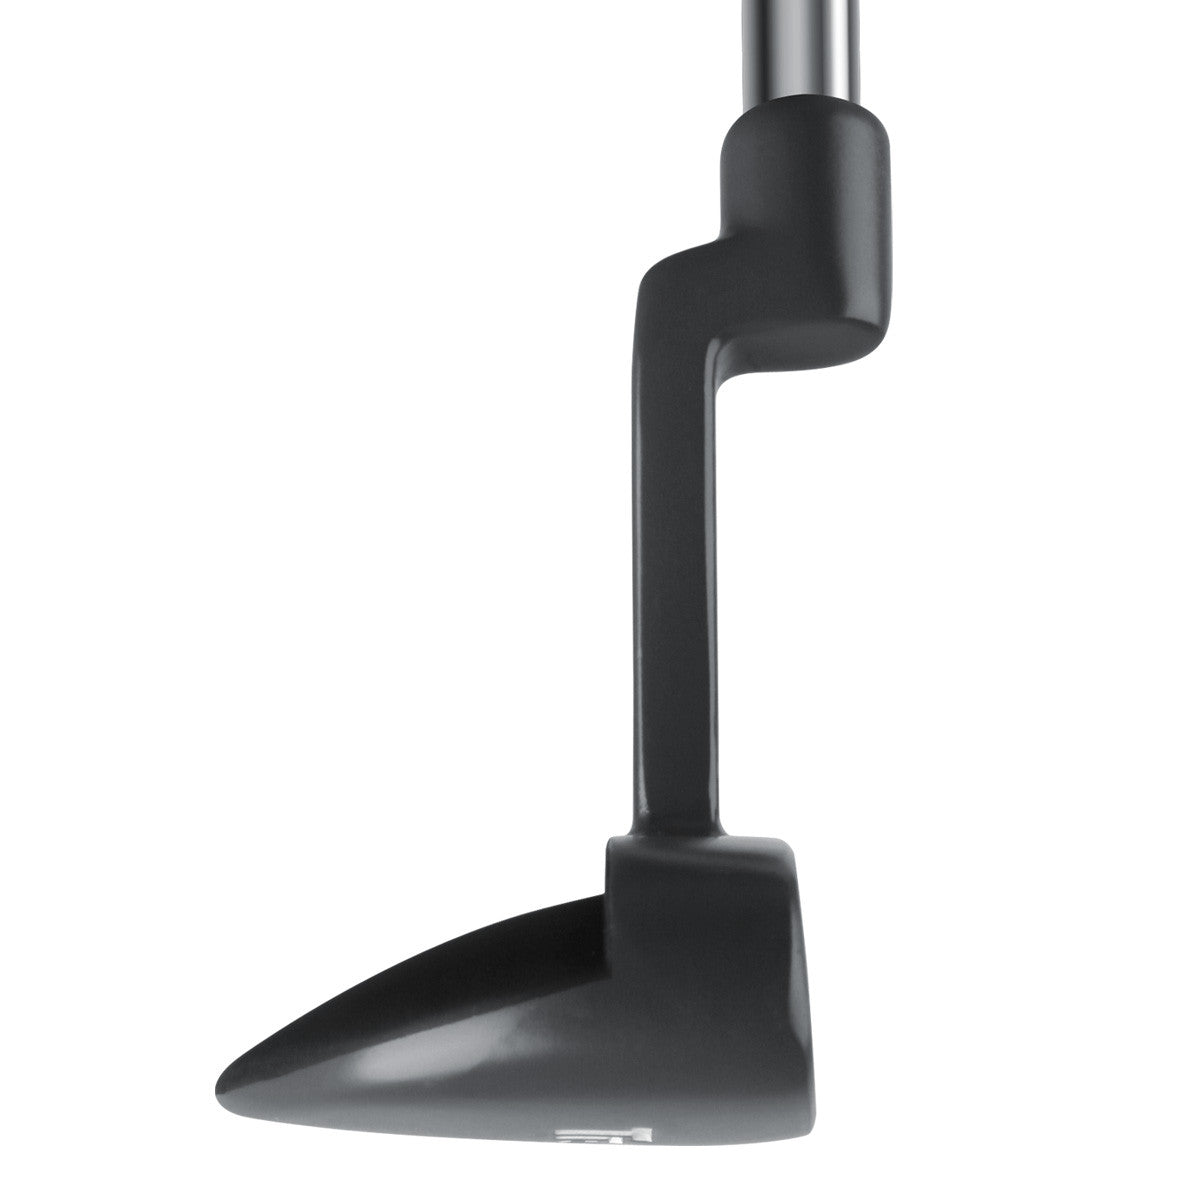 toe view of the Intech Trakker Series 3 Semi-Mallet Putter with a Plumber's neck hosel